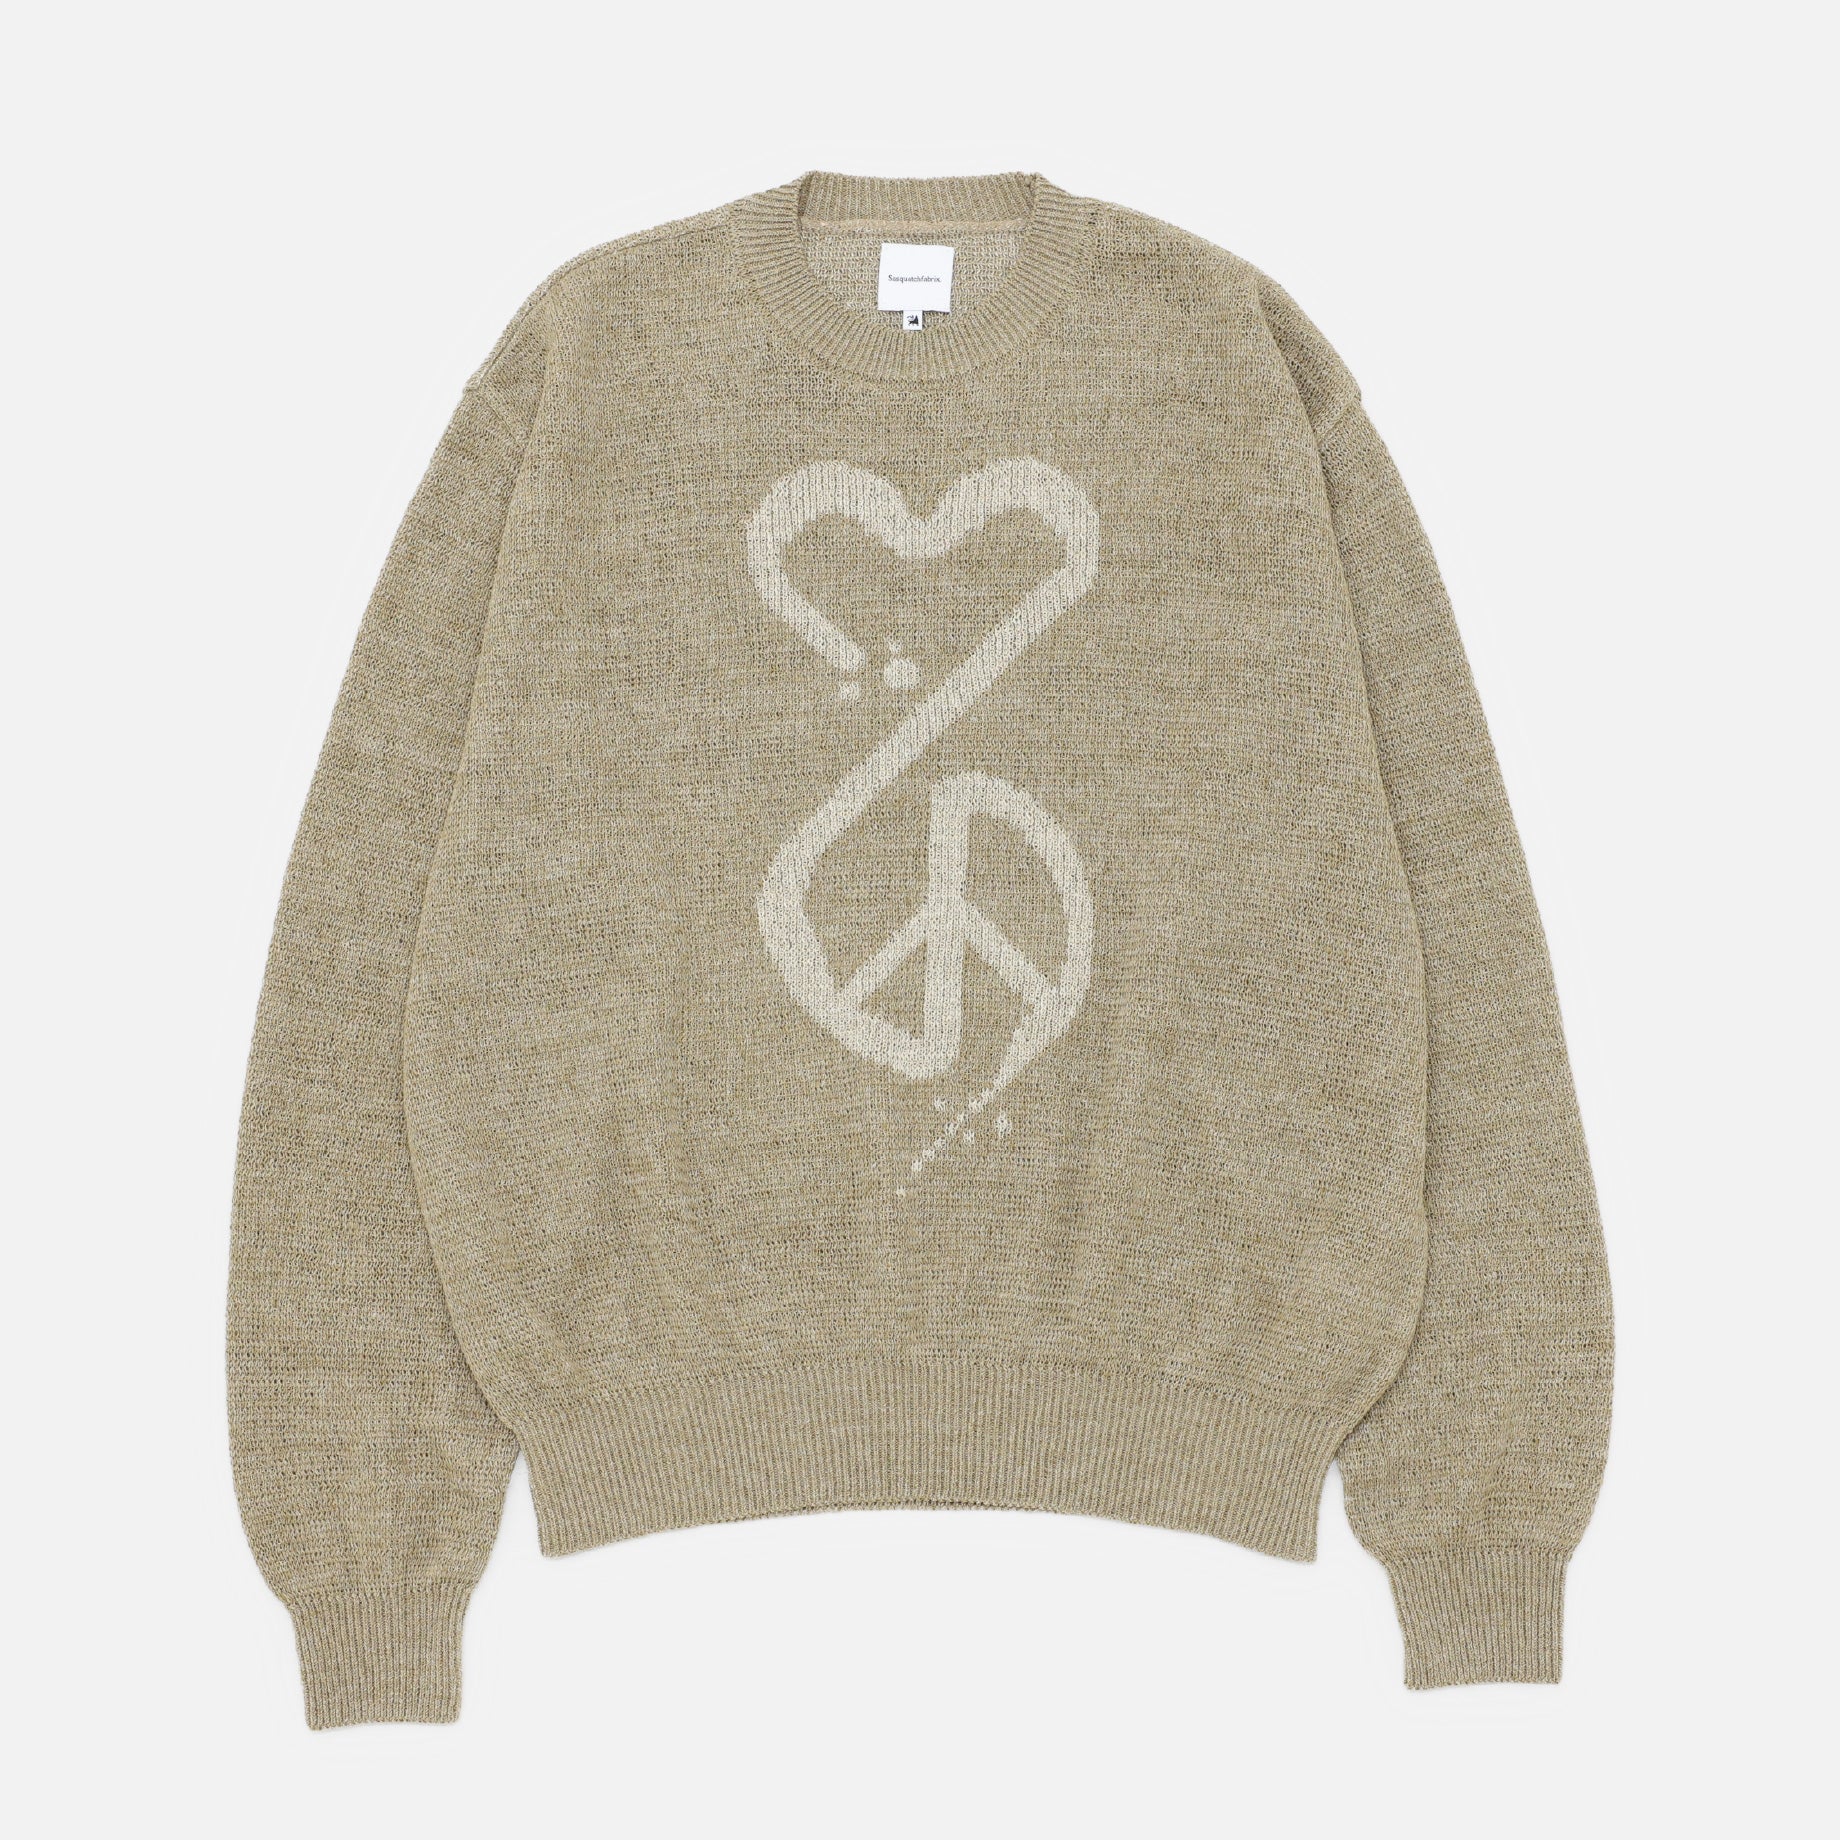 CALLIGRAPHIC “LOVE & PEACE” KNIT（BEIGE）